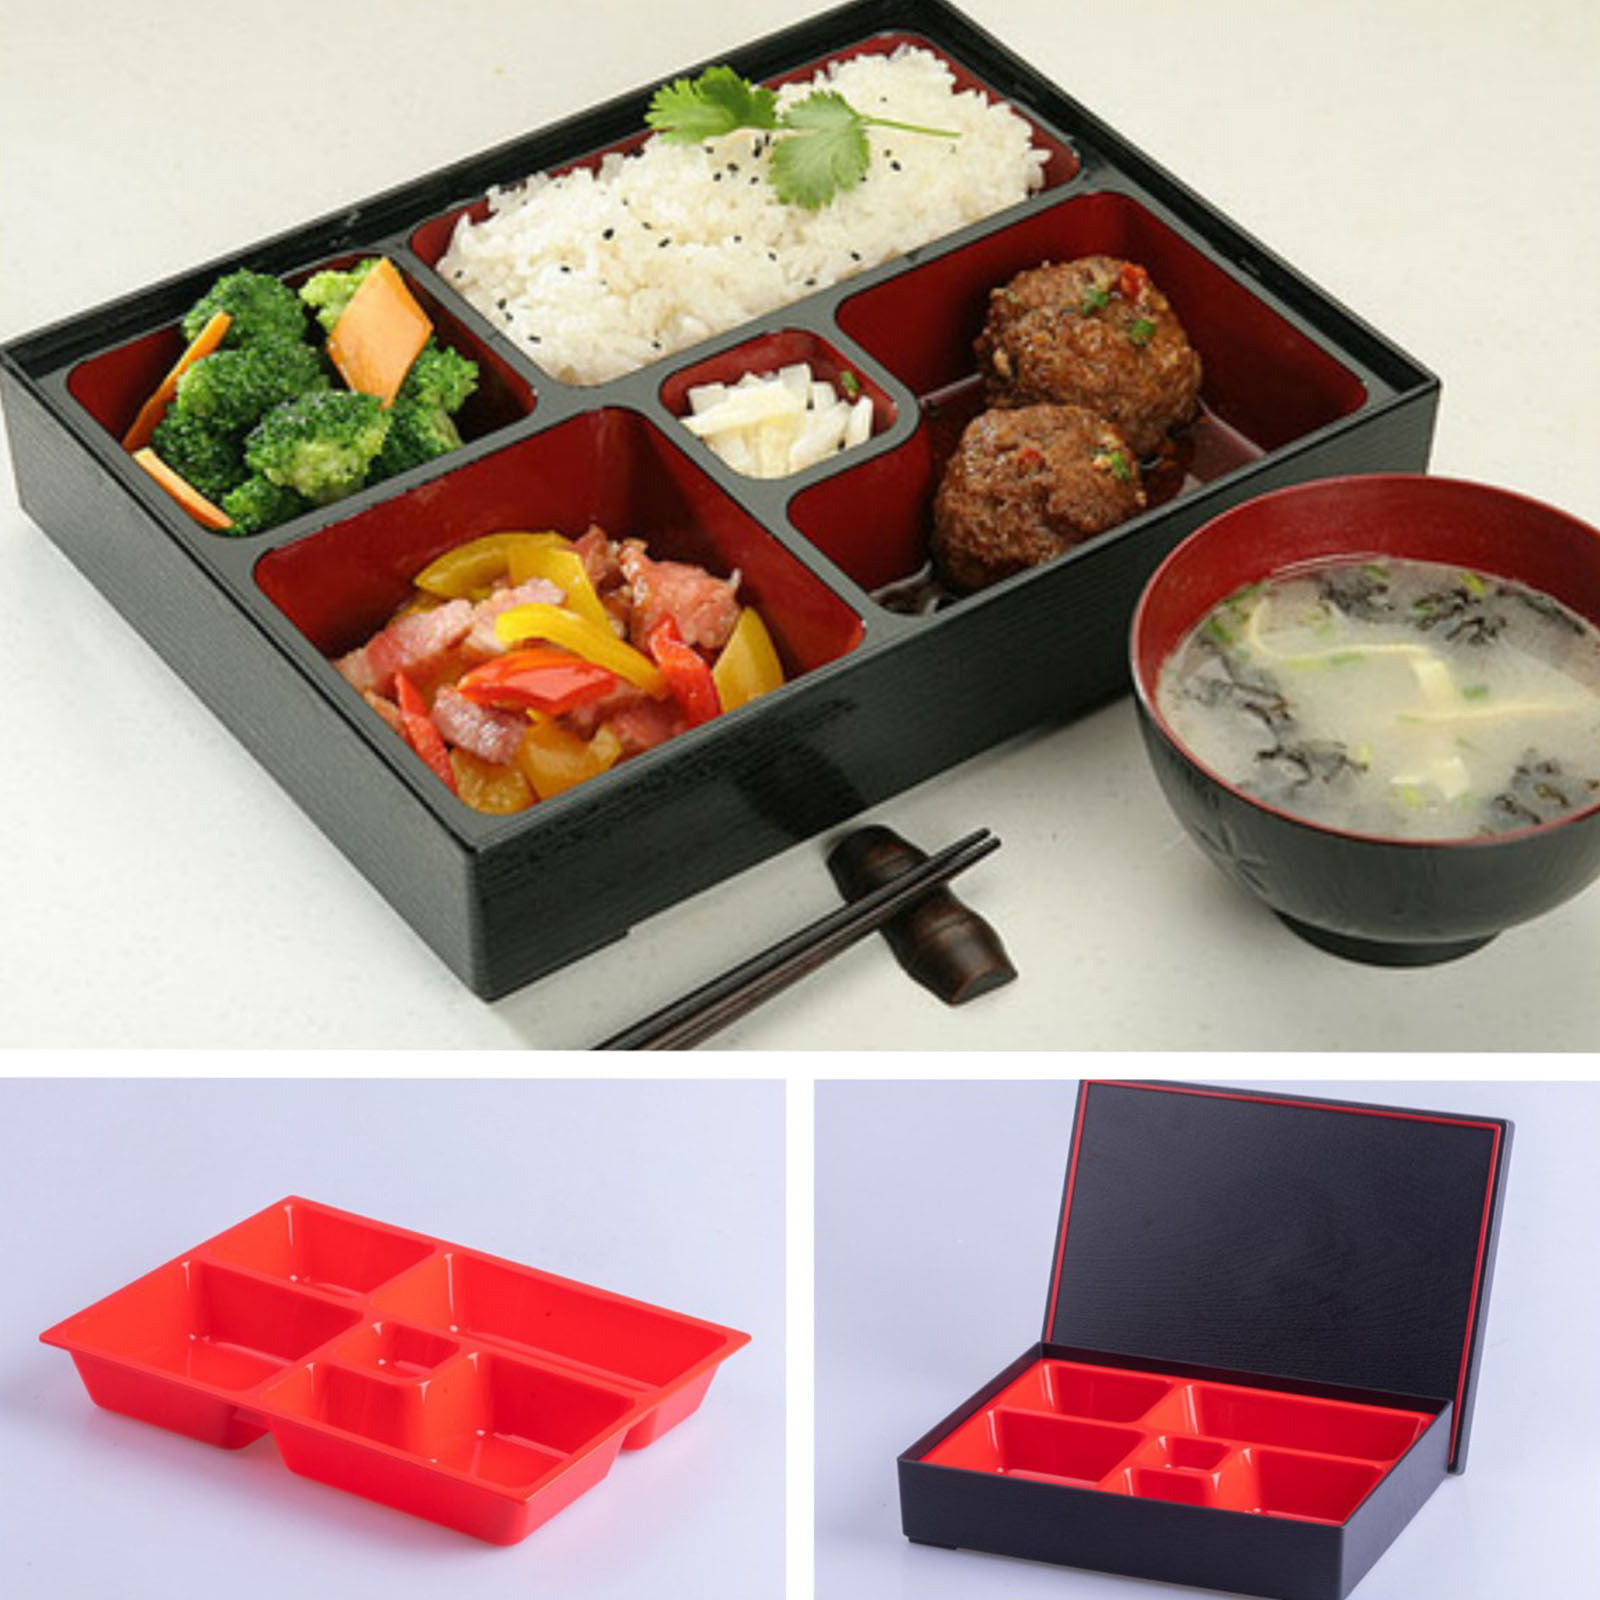 JapanBargain 1923, Red and Black Japanese Traditional Plastic Lacquered  Lunch Bento Box 5 Compartments for Restaurant or Home Tray Plate and Lid  3pc